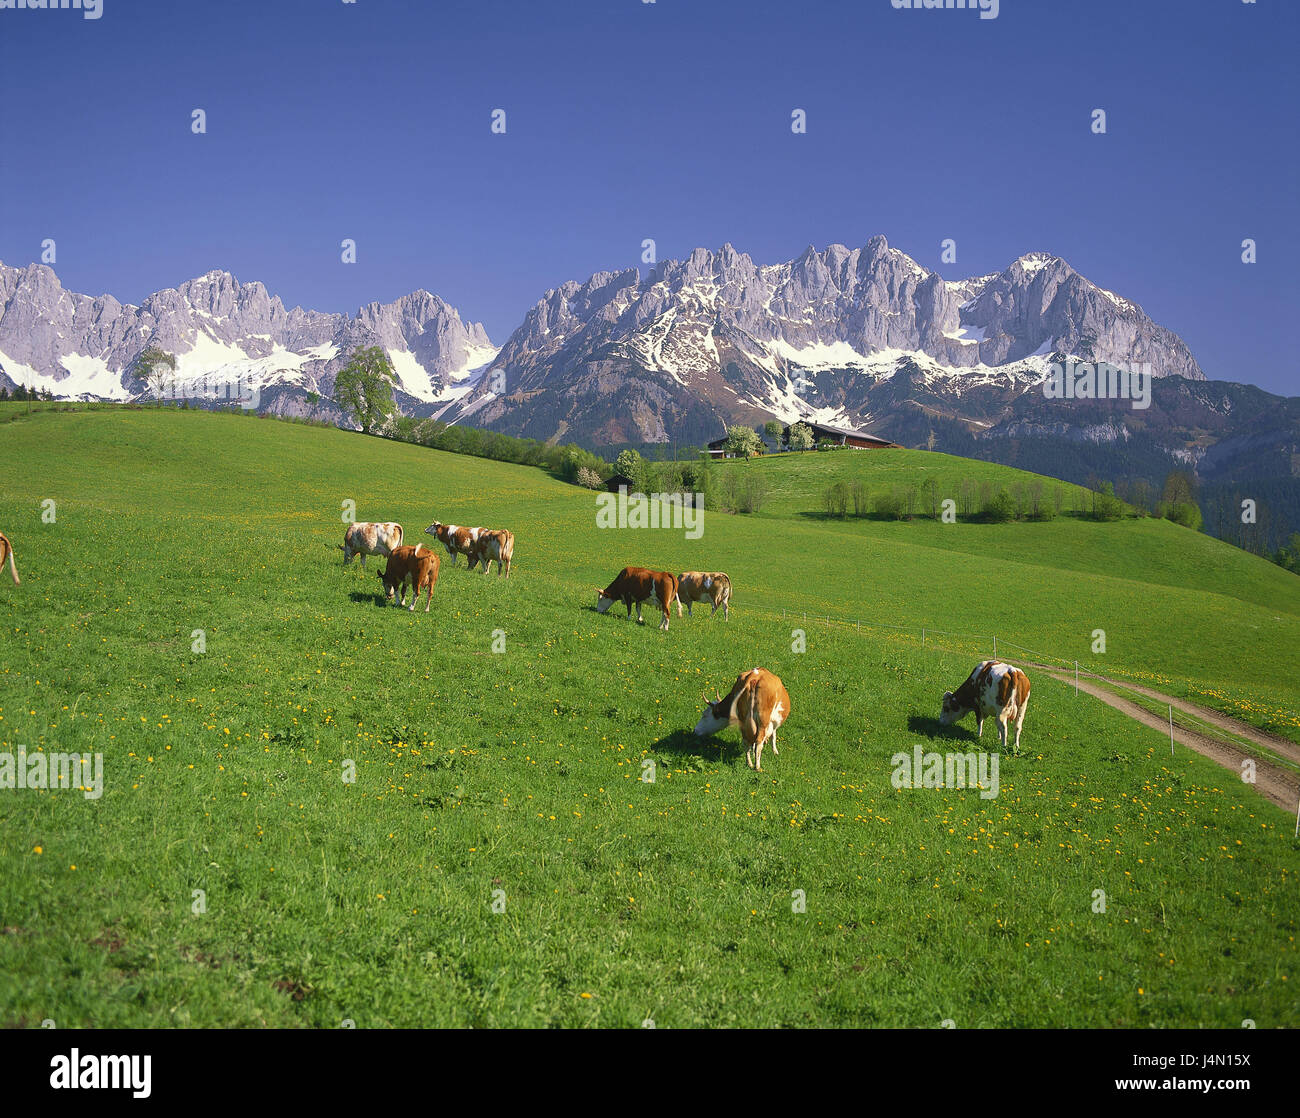 Austria, Tyrol, Kitzbuehel, Wilder Kaiser, Ellmauer stop, pasture, cows, Simmentaler cortexes, alps, Kaisergebirge, agriculture, meadow, animals, cattle breeding, keeping of pets, cow's focuses, scenery, rurally, summer, outside, deserted, sky, blue, cloudless, Stock Photo